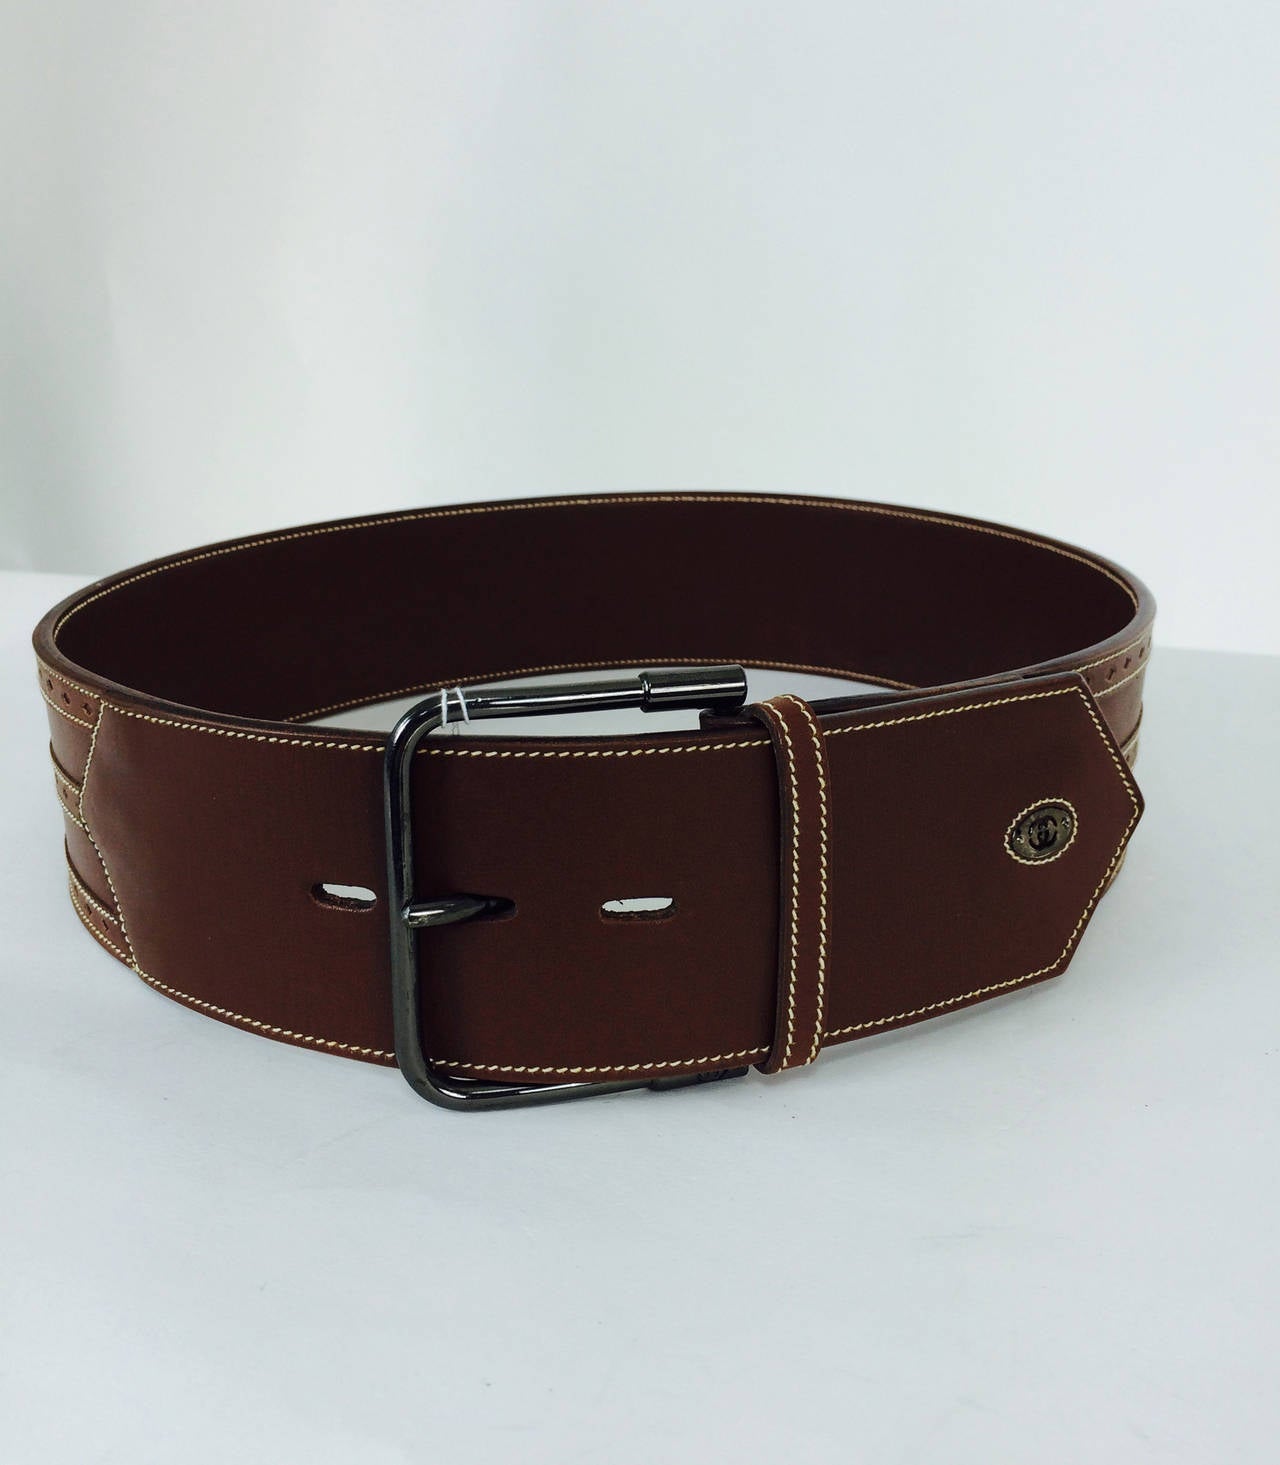 Gucci chocolate brown wide leather belt, for your waist...Three top stitched bands of decorative leather run the length of the belt...The buckle is gunmetal...Marked 42, the belt is 36 1/2